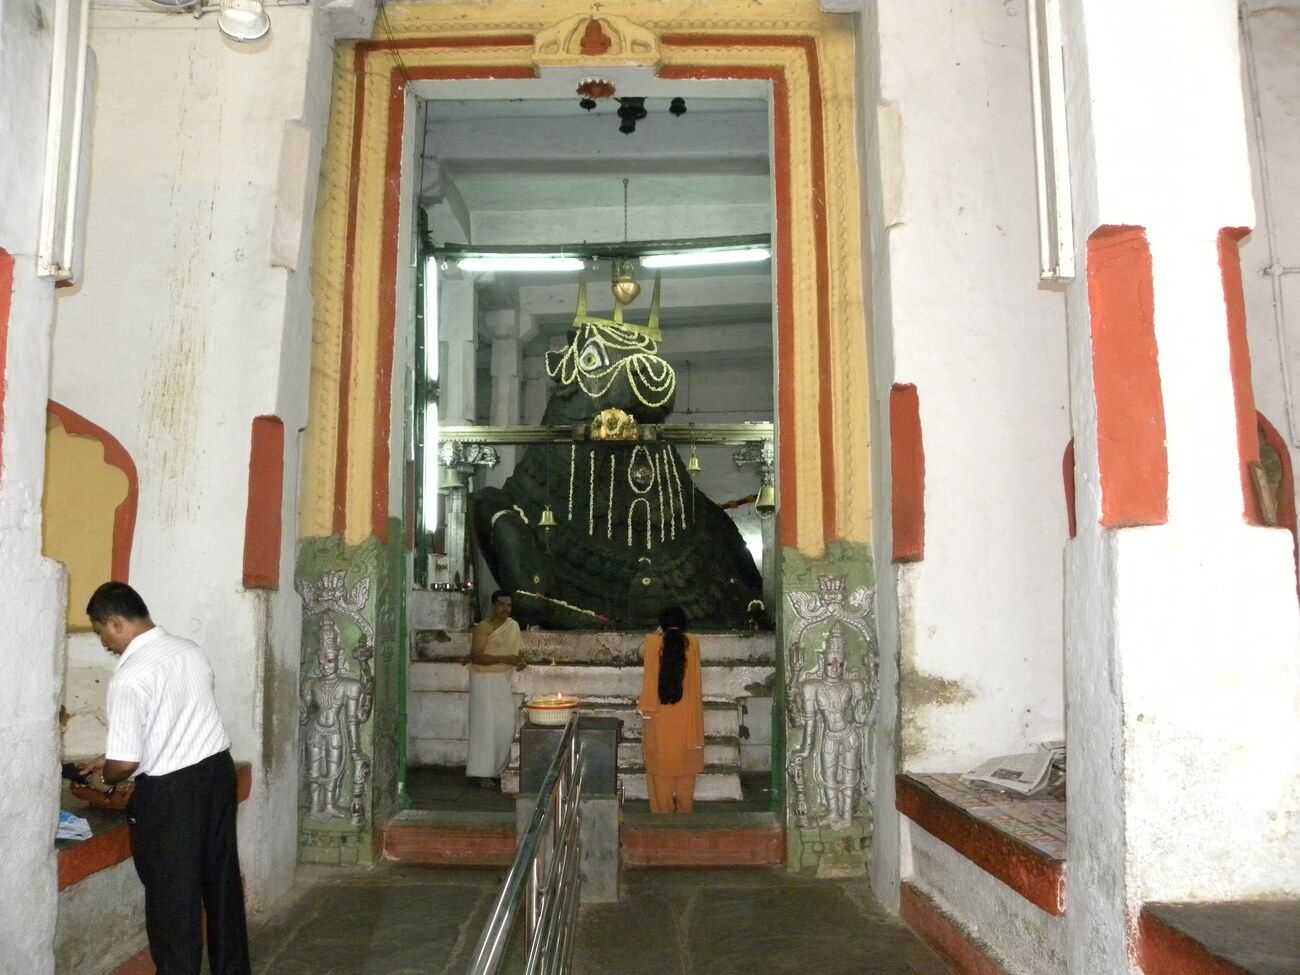 One of the most ancient and authentic temples in Bengaluru is the Bull Temple, also known as the Nandi Temple. It is popularly called as 'Dodda Basavana Gudi' by the locals and is the biggest temple dedicated to Nandi in the world 